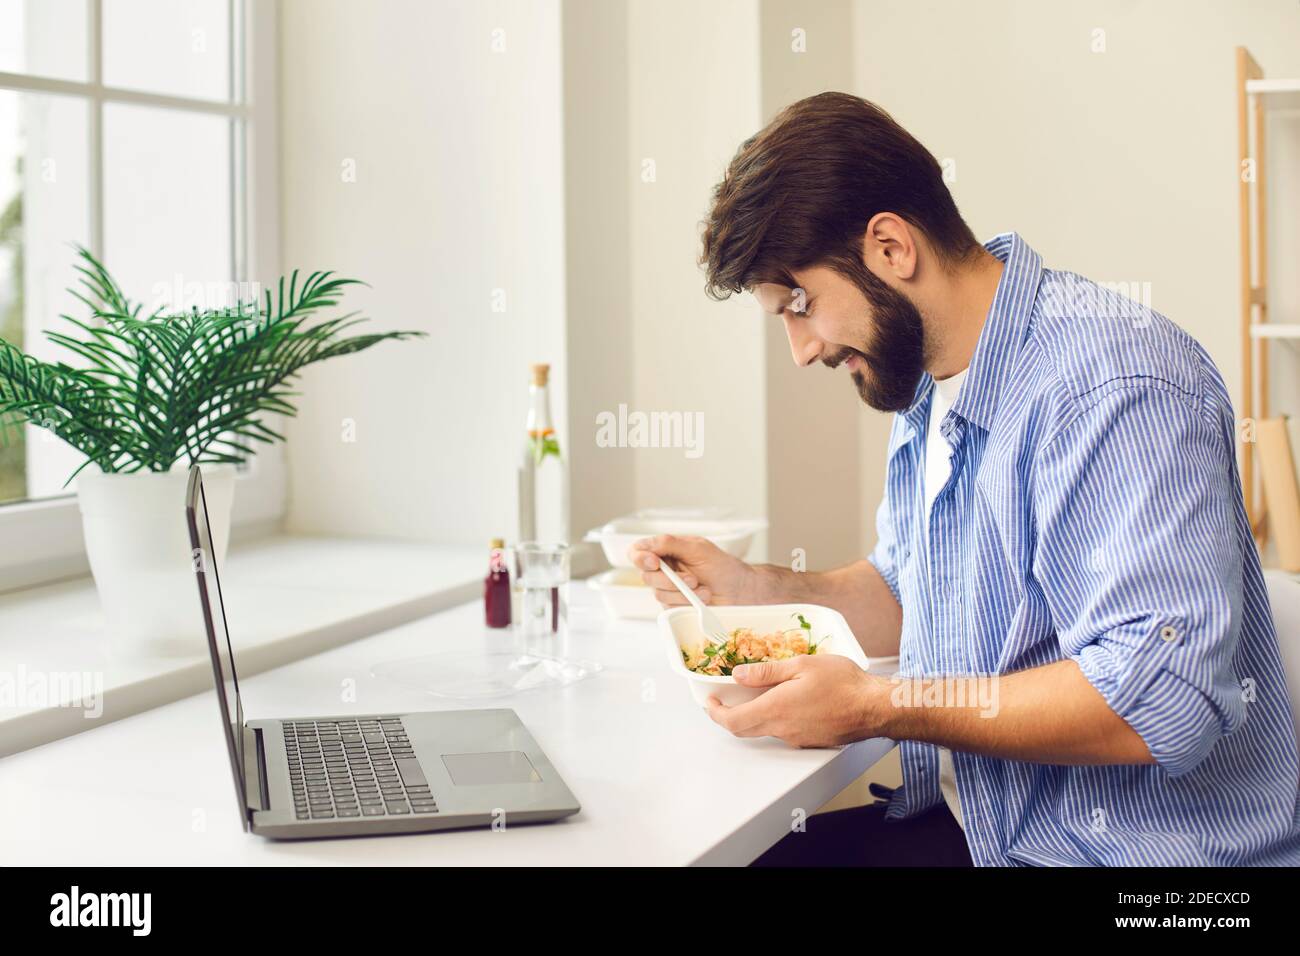 https://c8.alamy.com/comp/2DECXCD/busy-young-man-eating-takeaway-food-during-lunch-break-at-home-or-in-the-office-2DECXCD.jpg